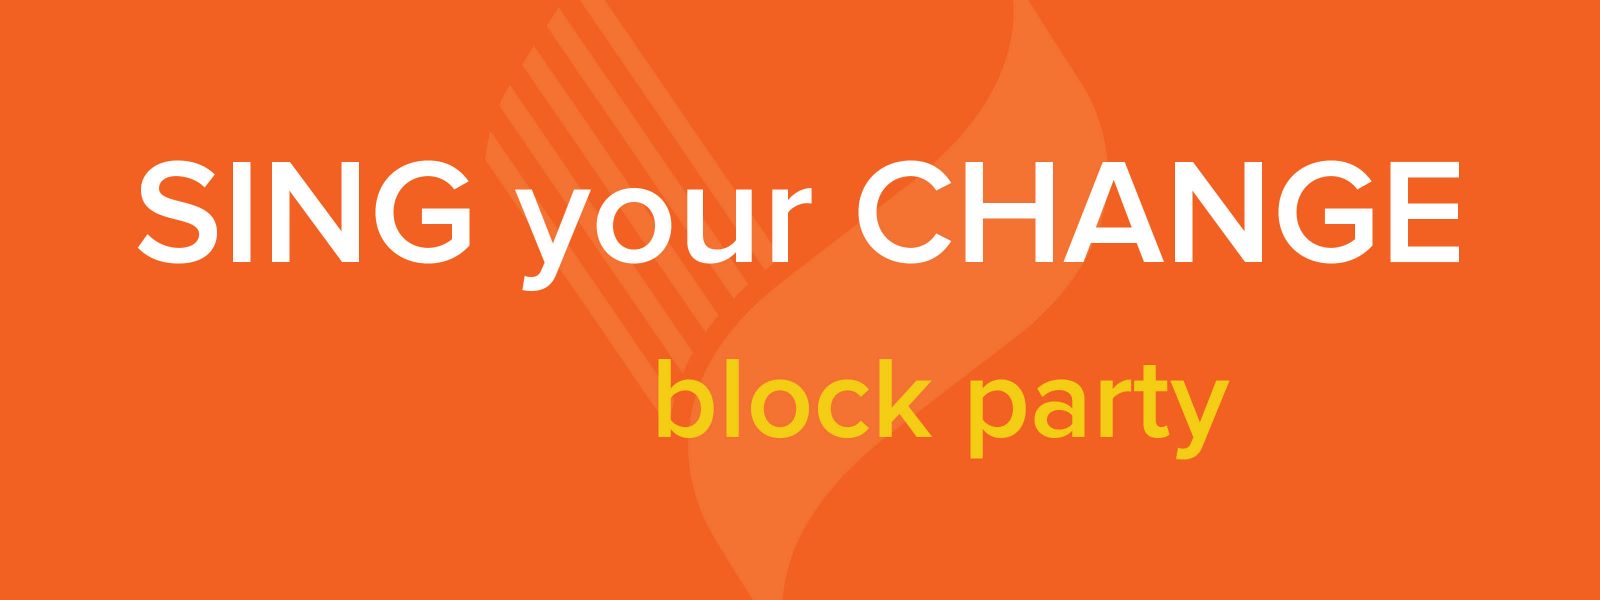 Sing Your Change Block Party with orange background and VocalEssence logo